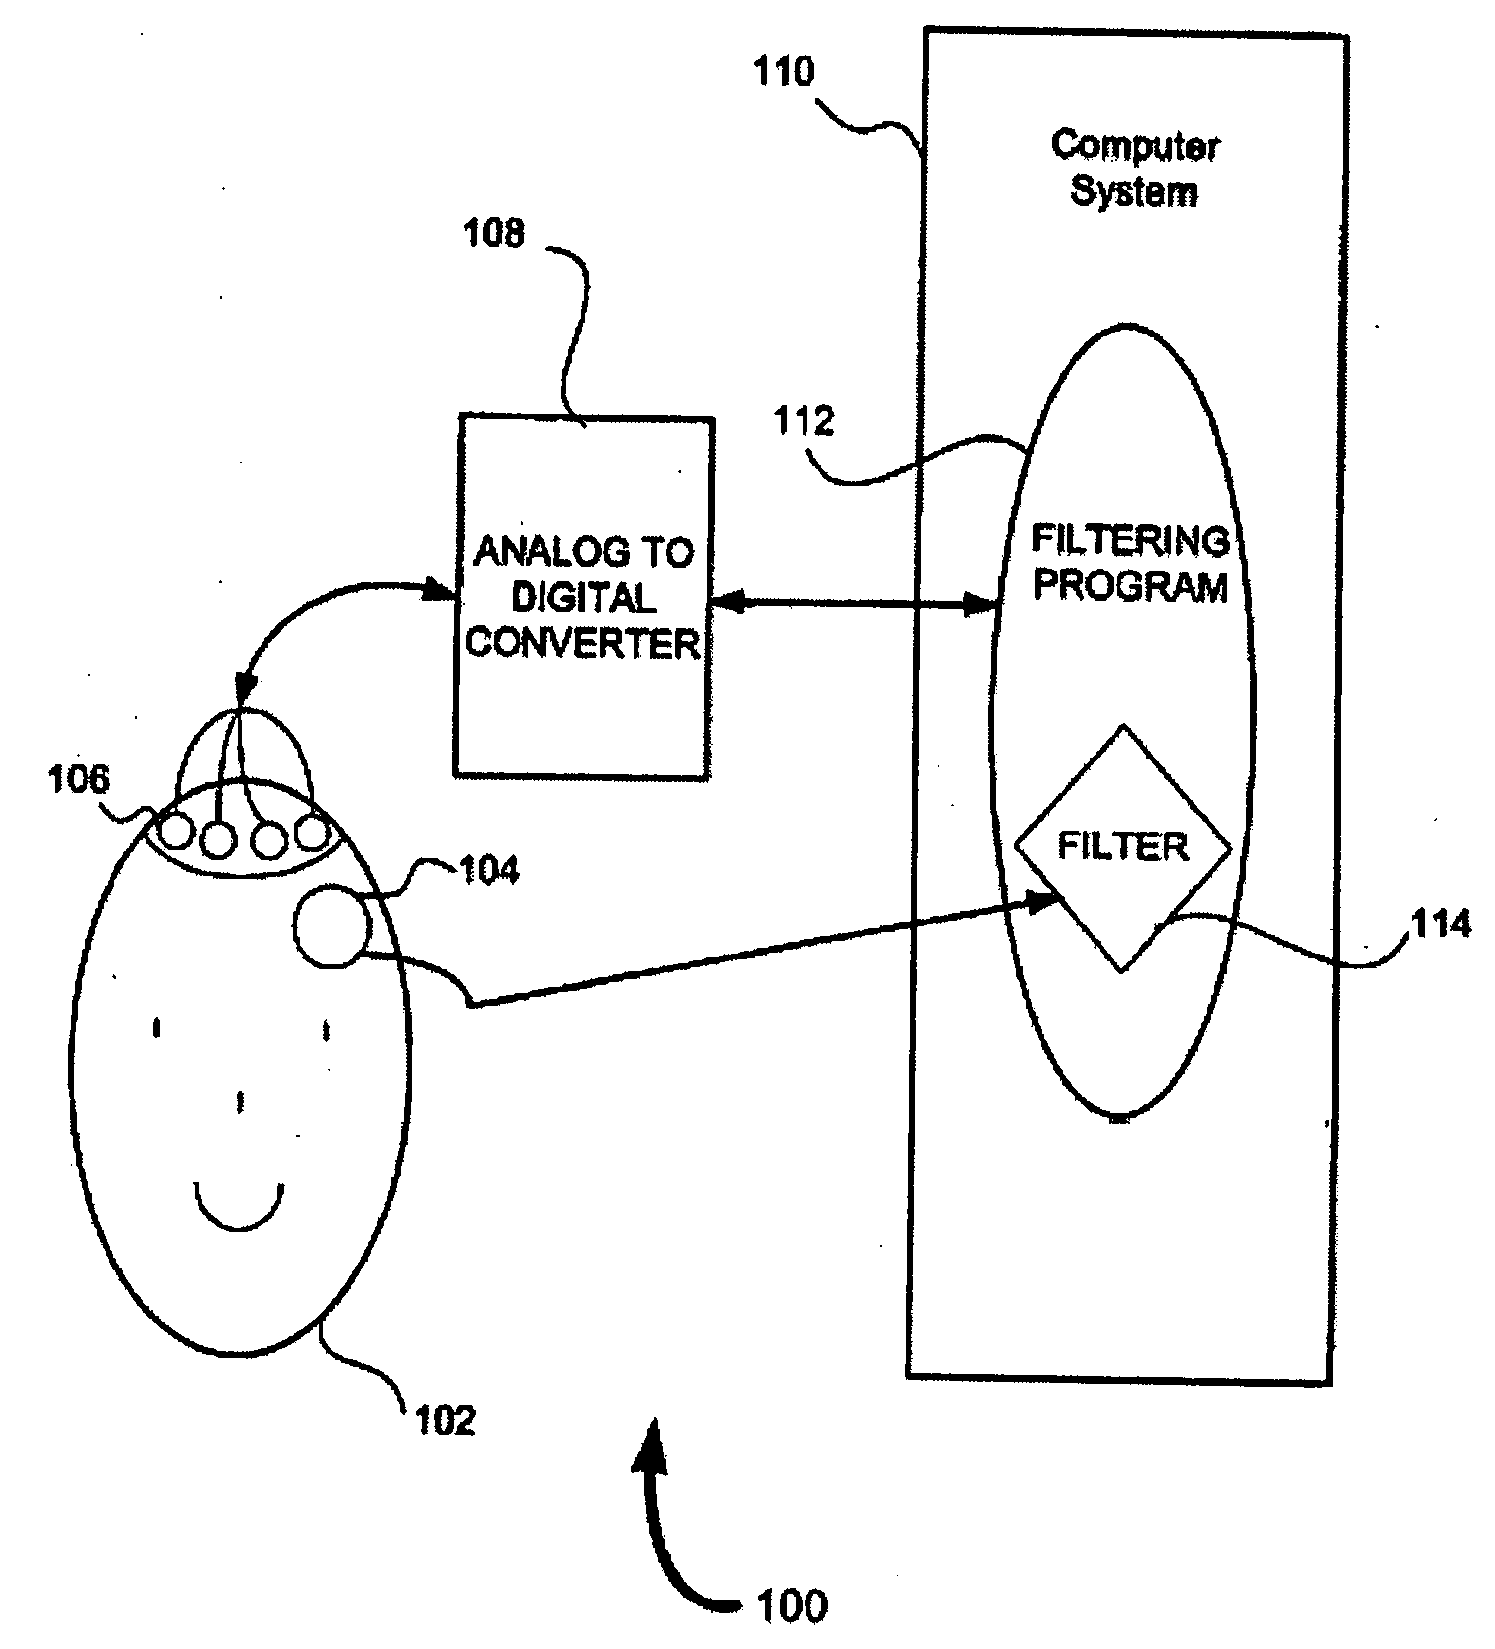 Apparatus and method for ascertaining and recording electrophysiological signals